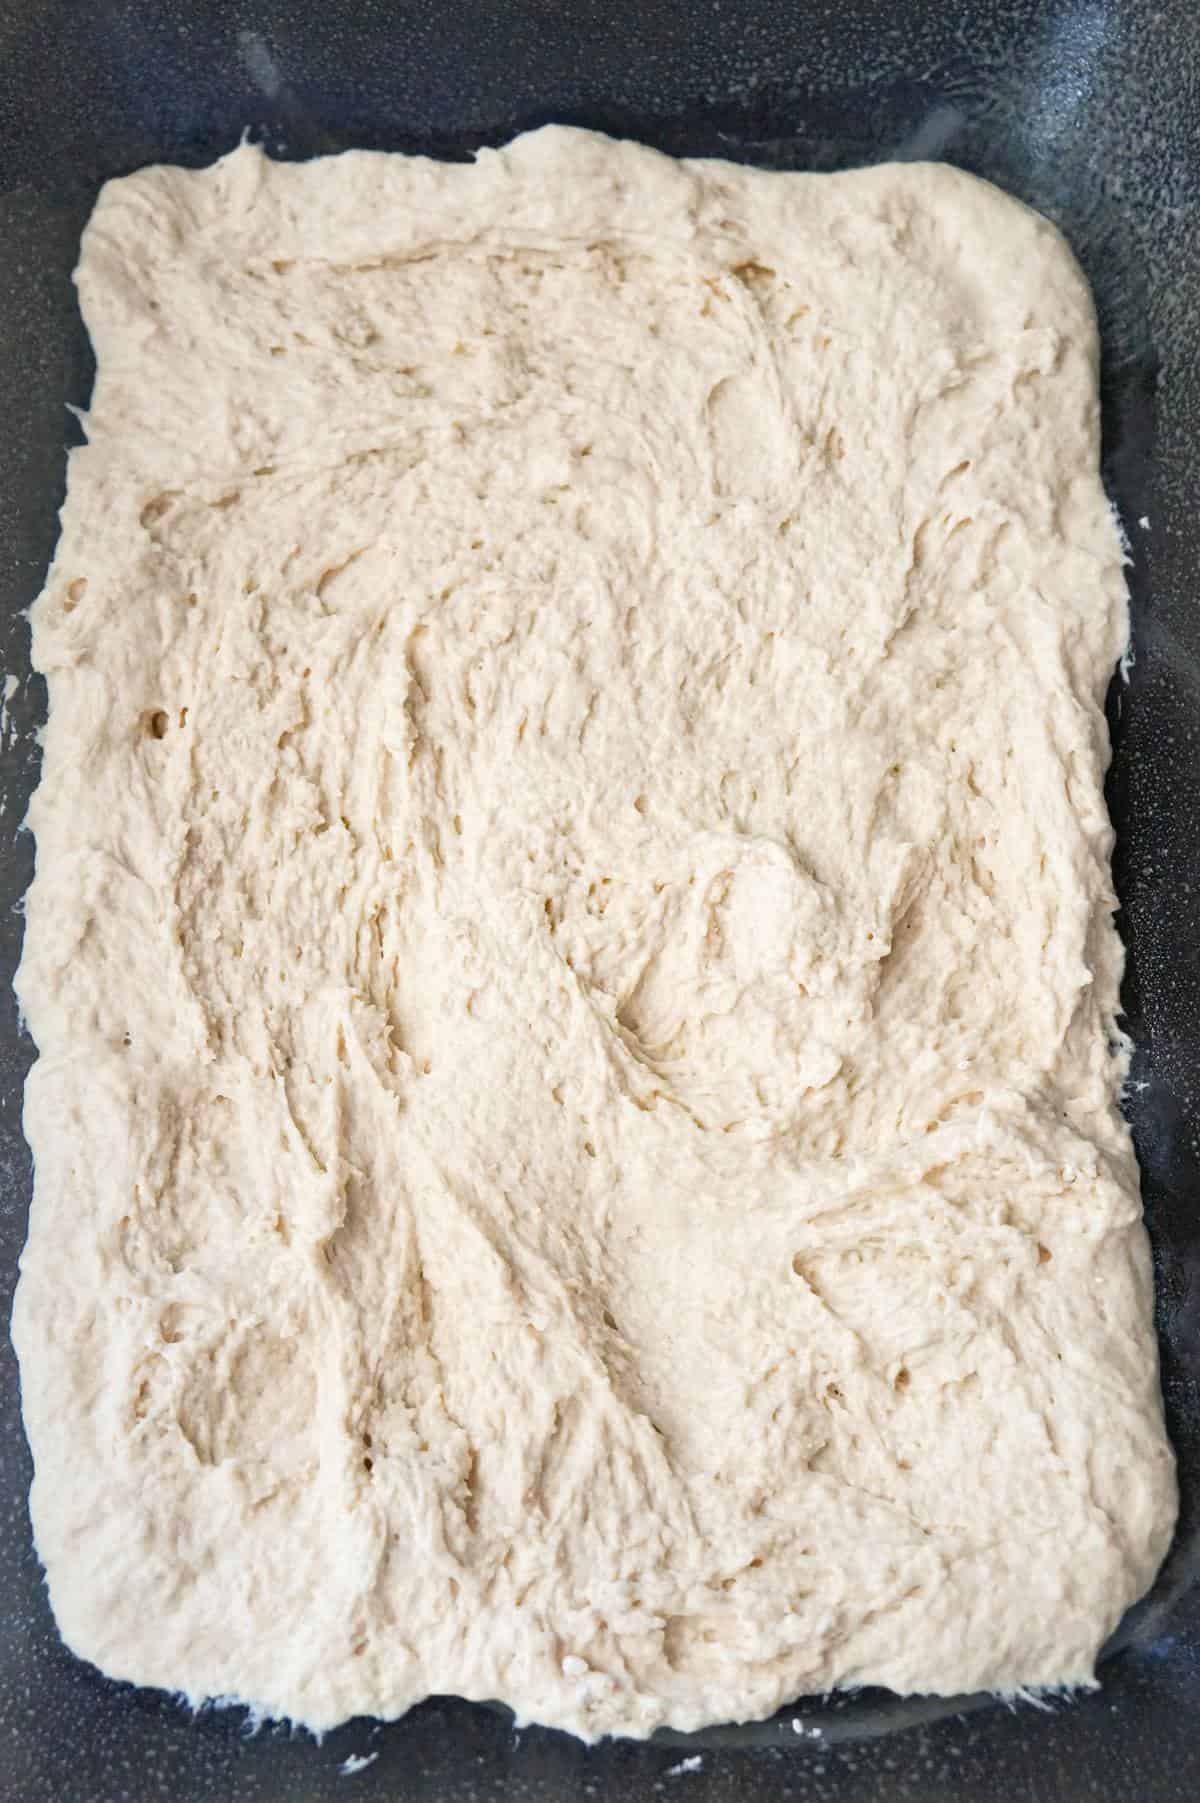 Bisquick dough in the bottom of a 9 x 13 inch baking dish